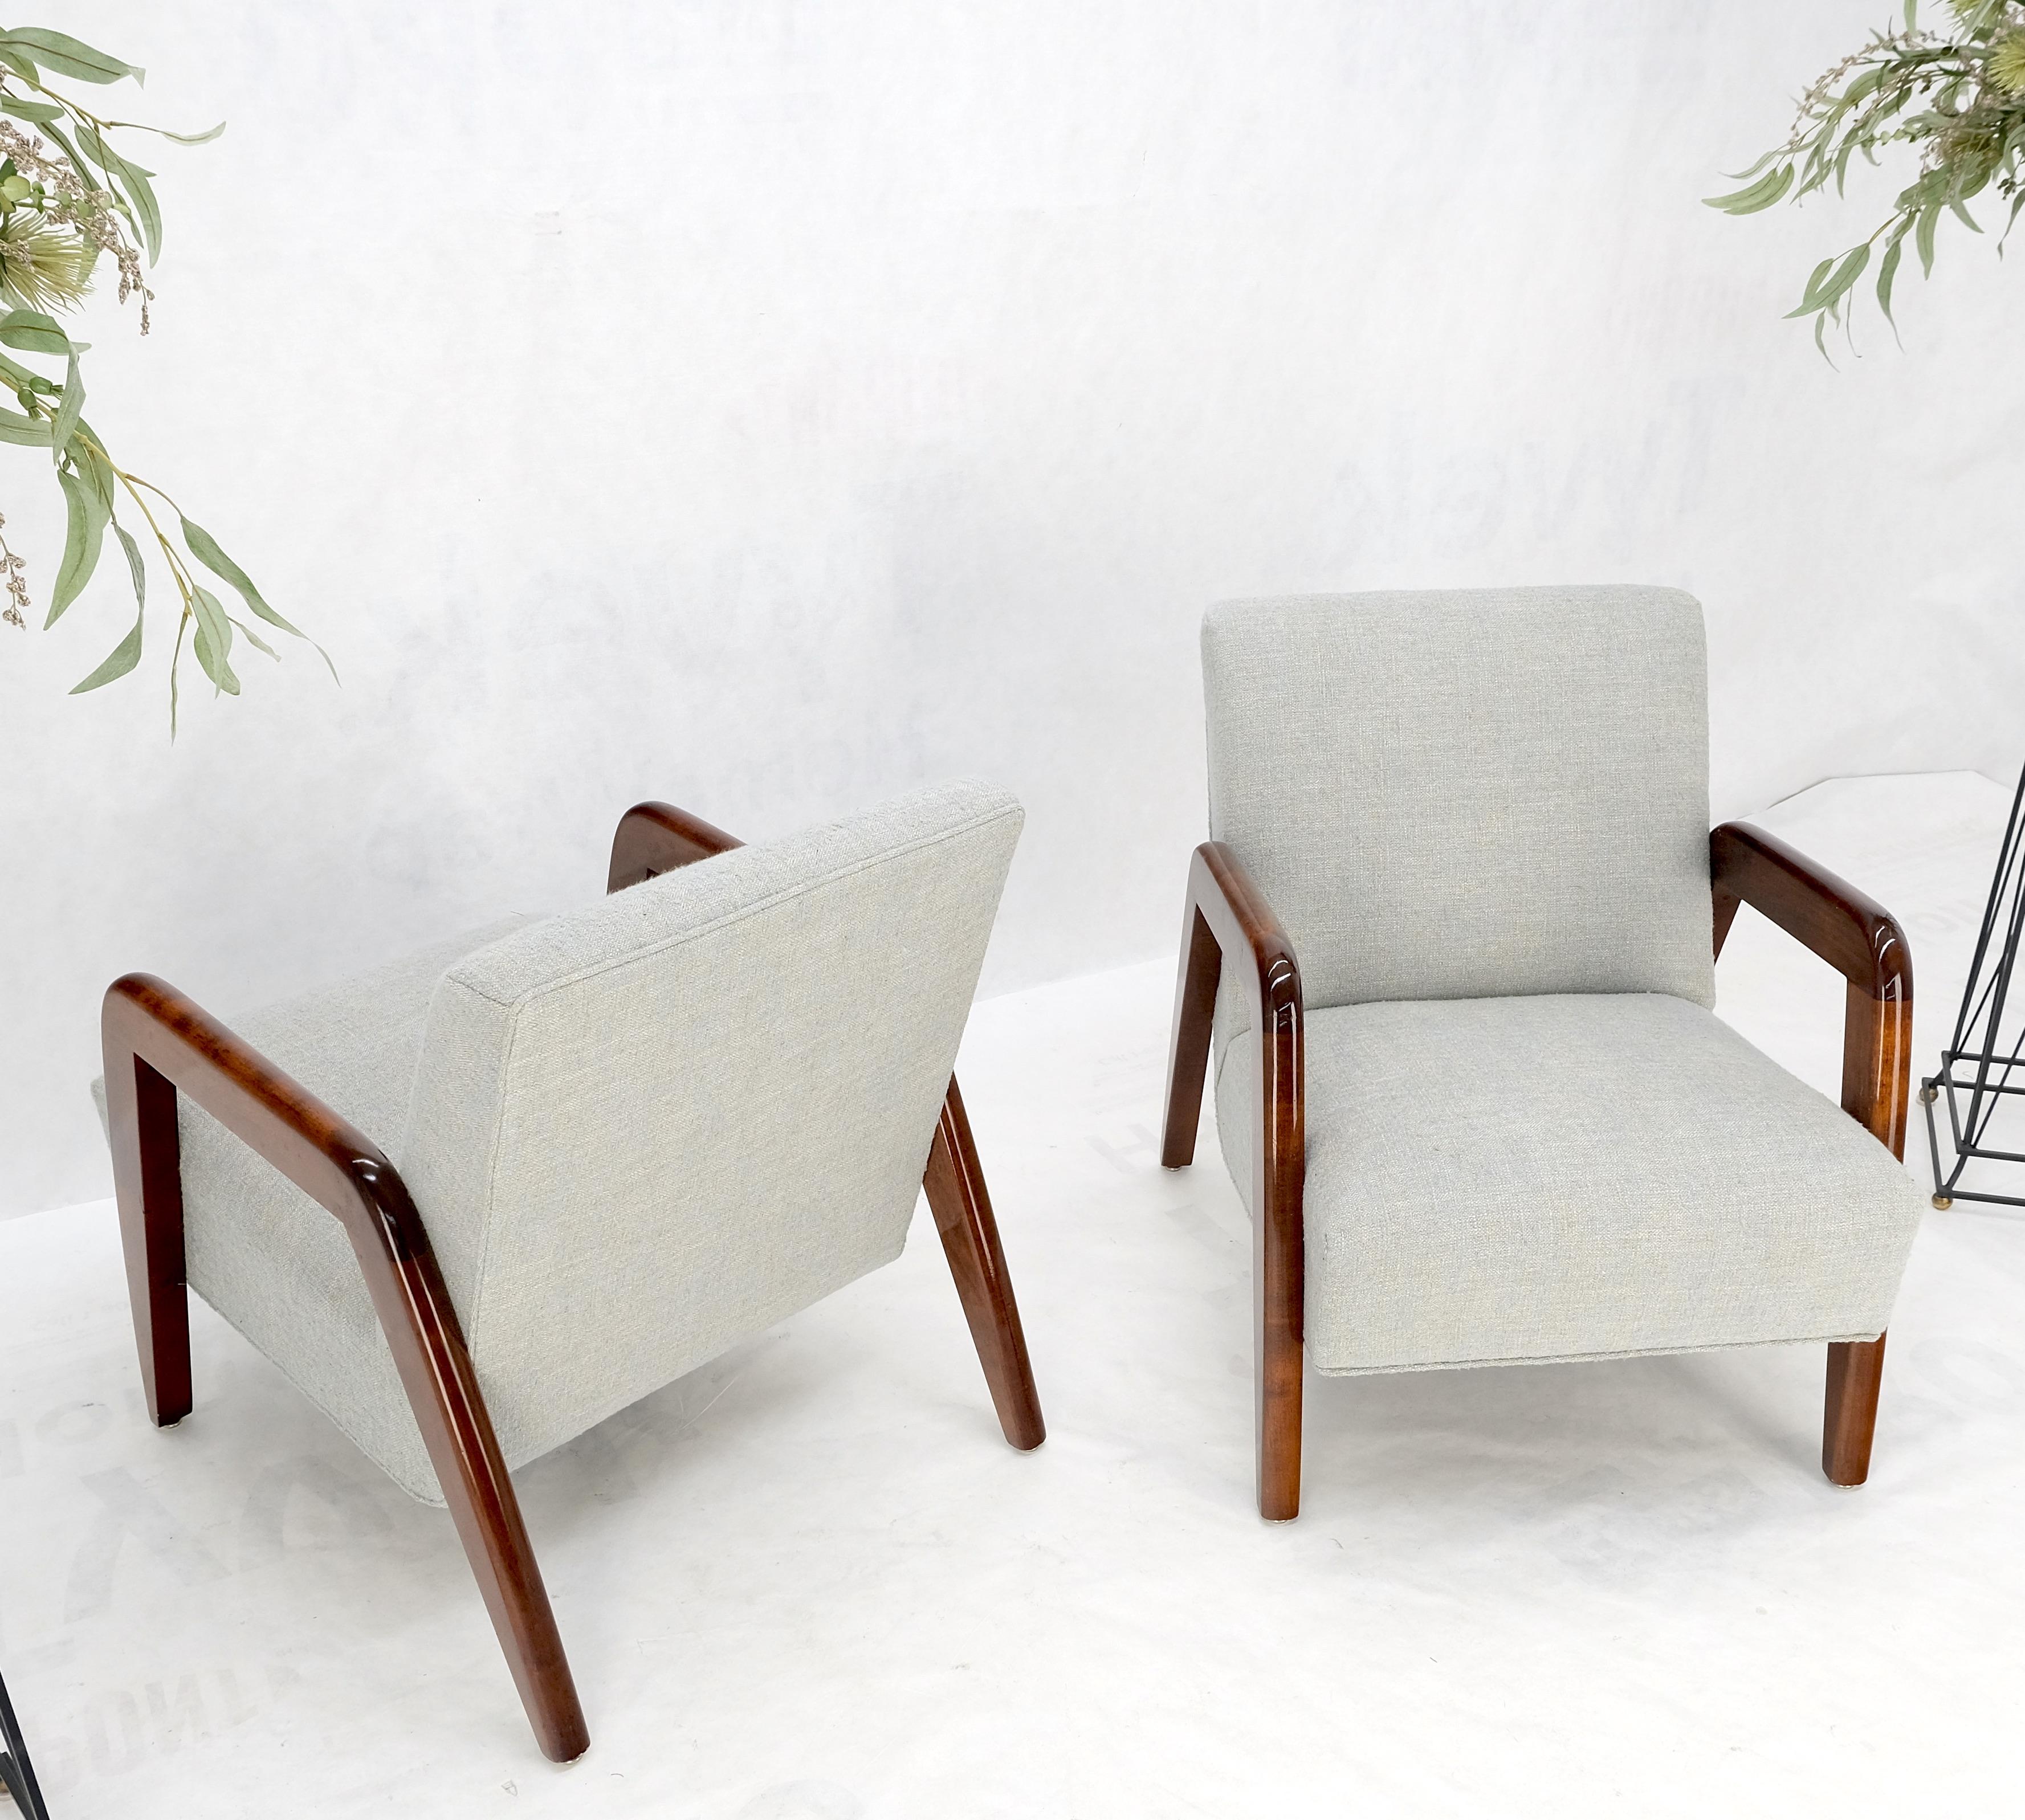 Pair New Leinen Polsterung Heavy Solid Maple Frames American  Lounge Chairs MINT! im Angebot 4